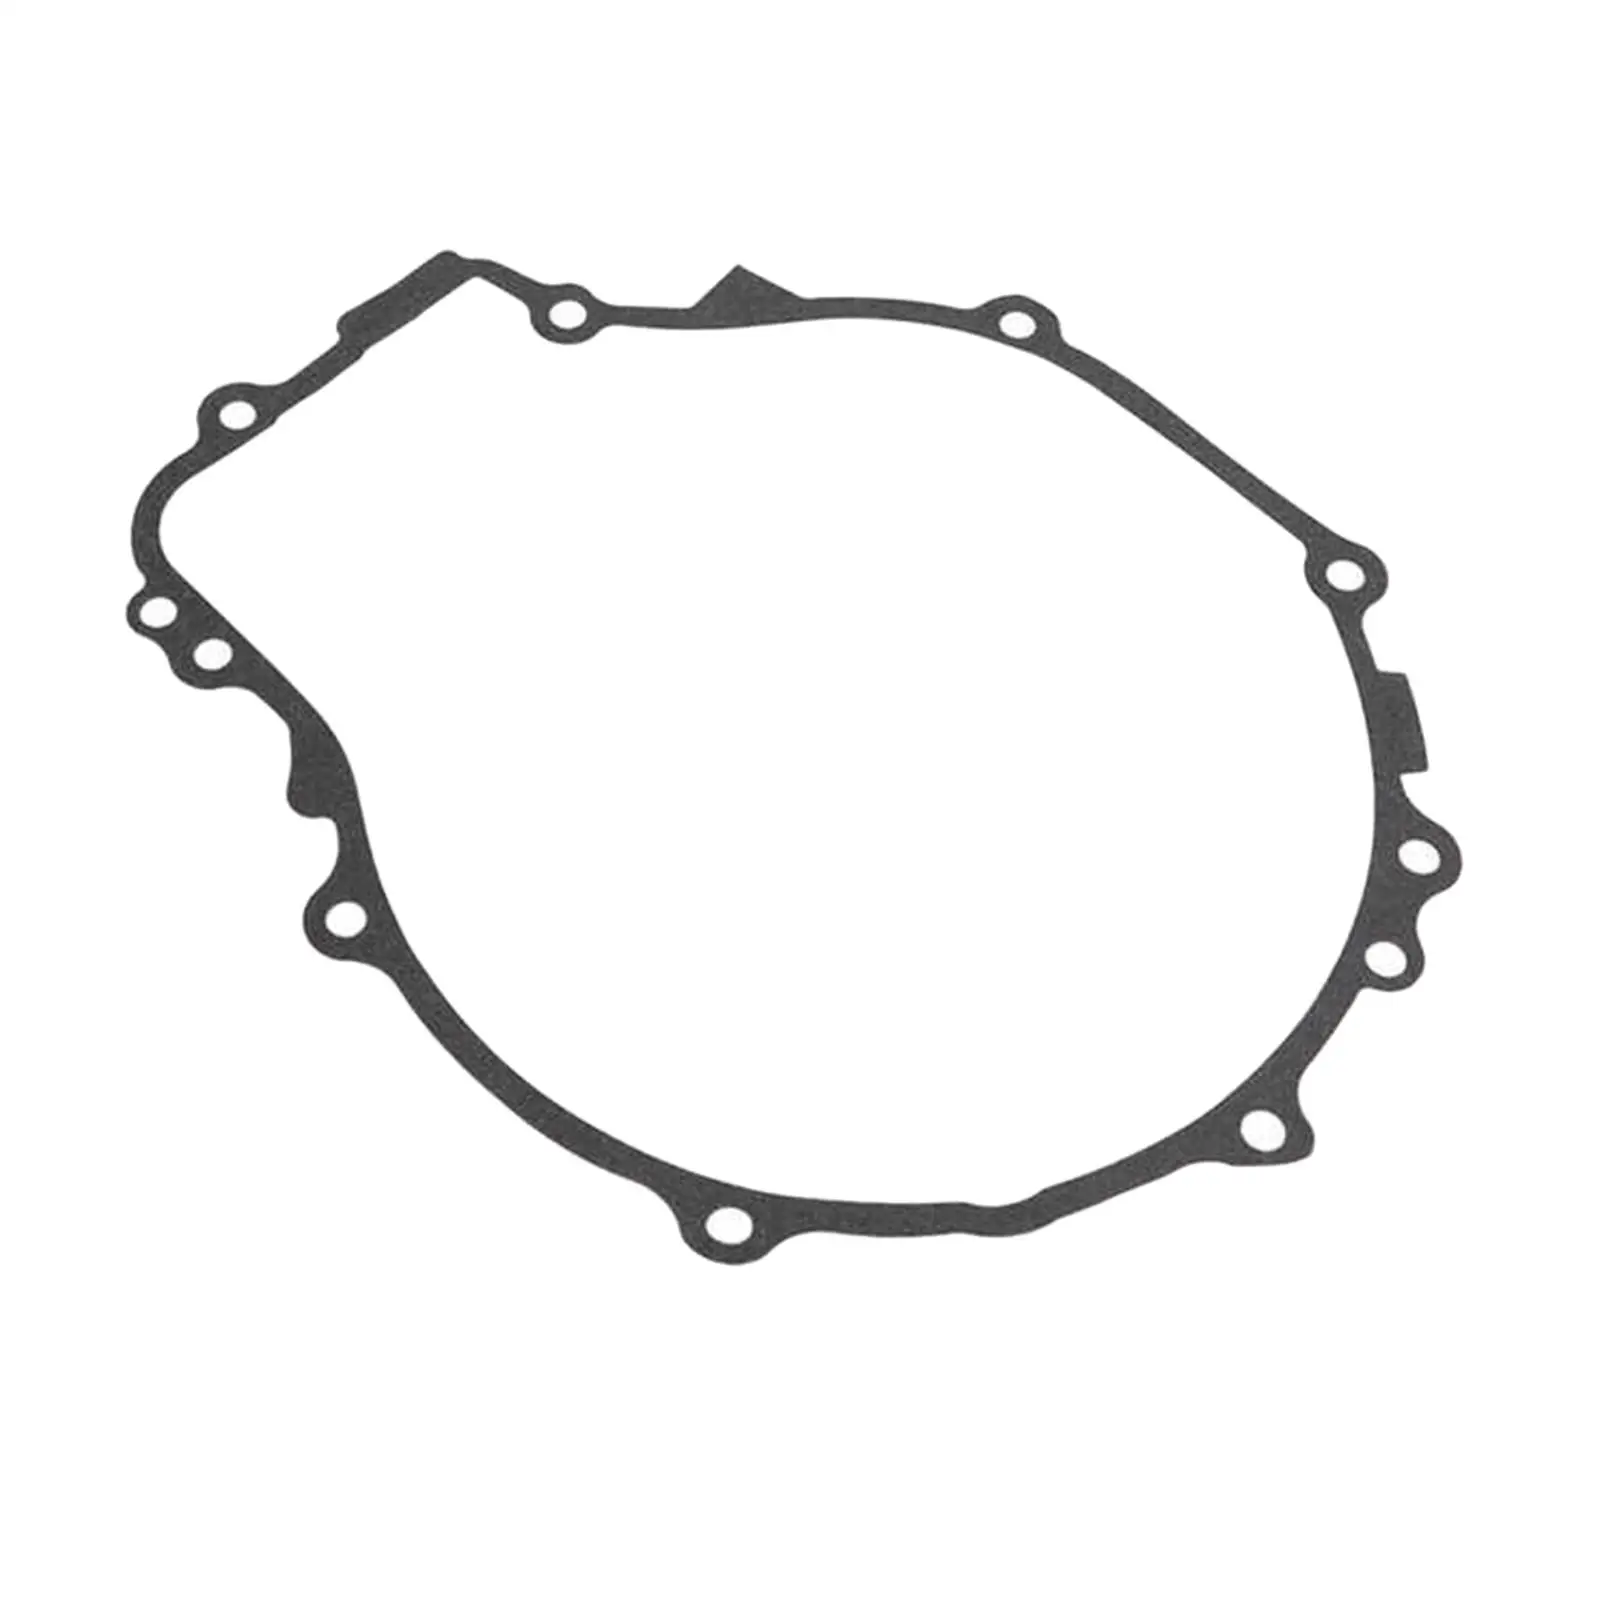 Vehicle Pull Start Gasket/ 3084933 for 500 Accessories High Quality/